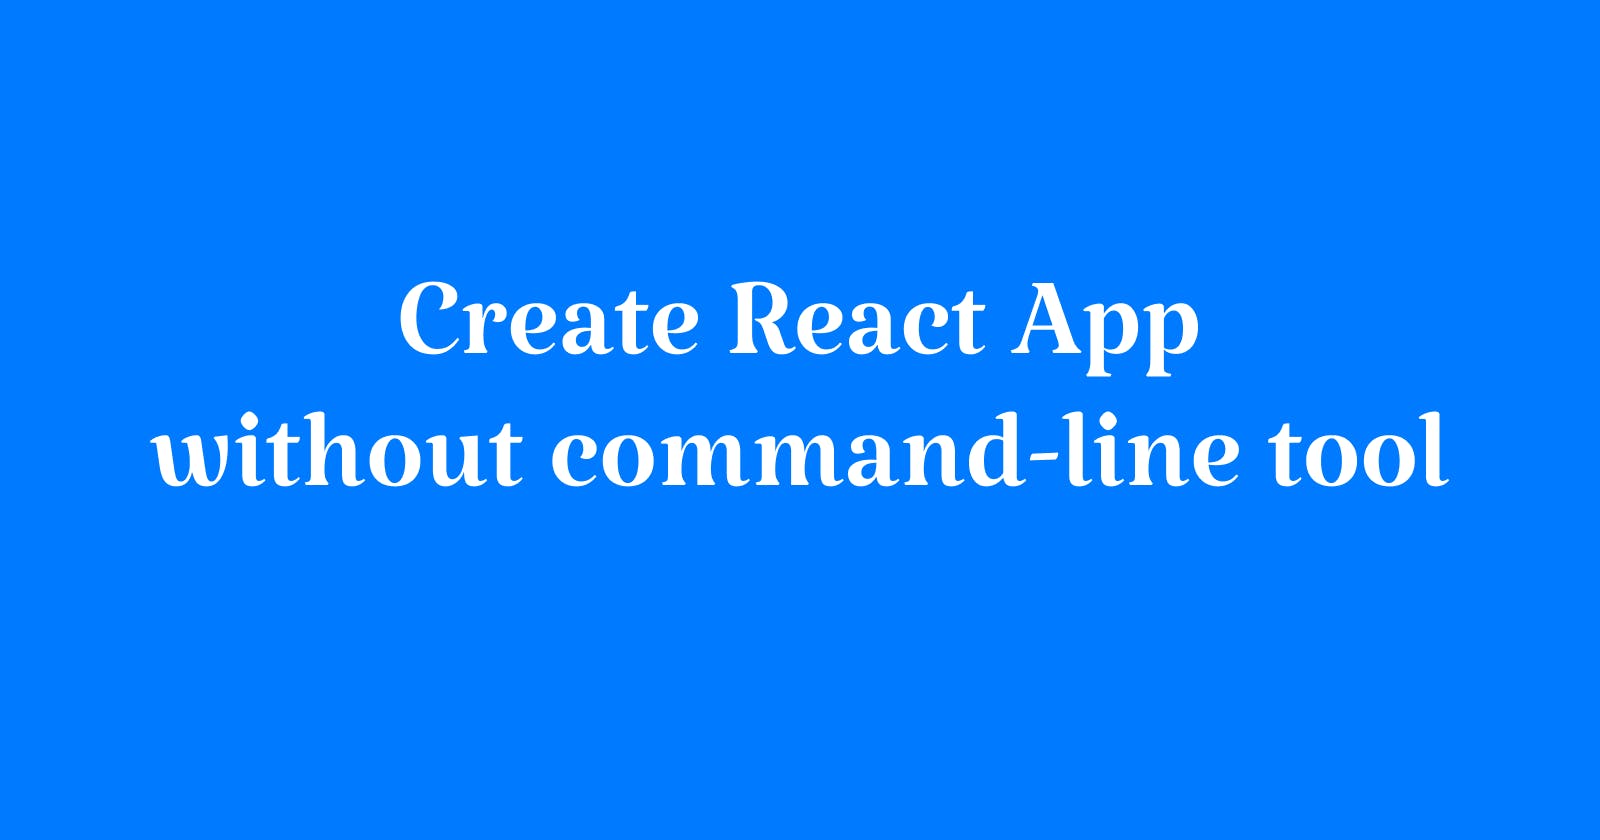 Create React App without command-line tool